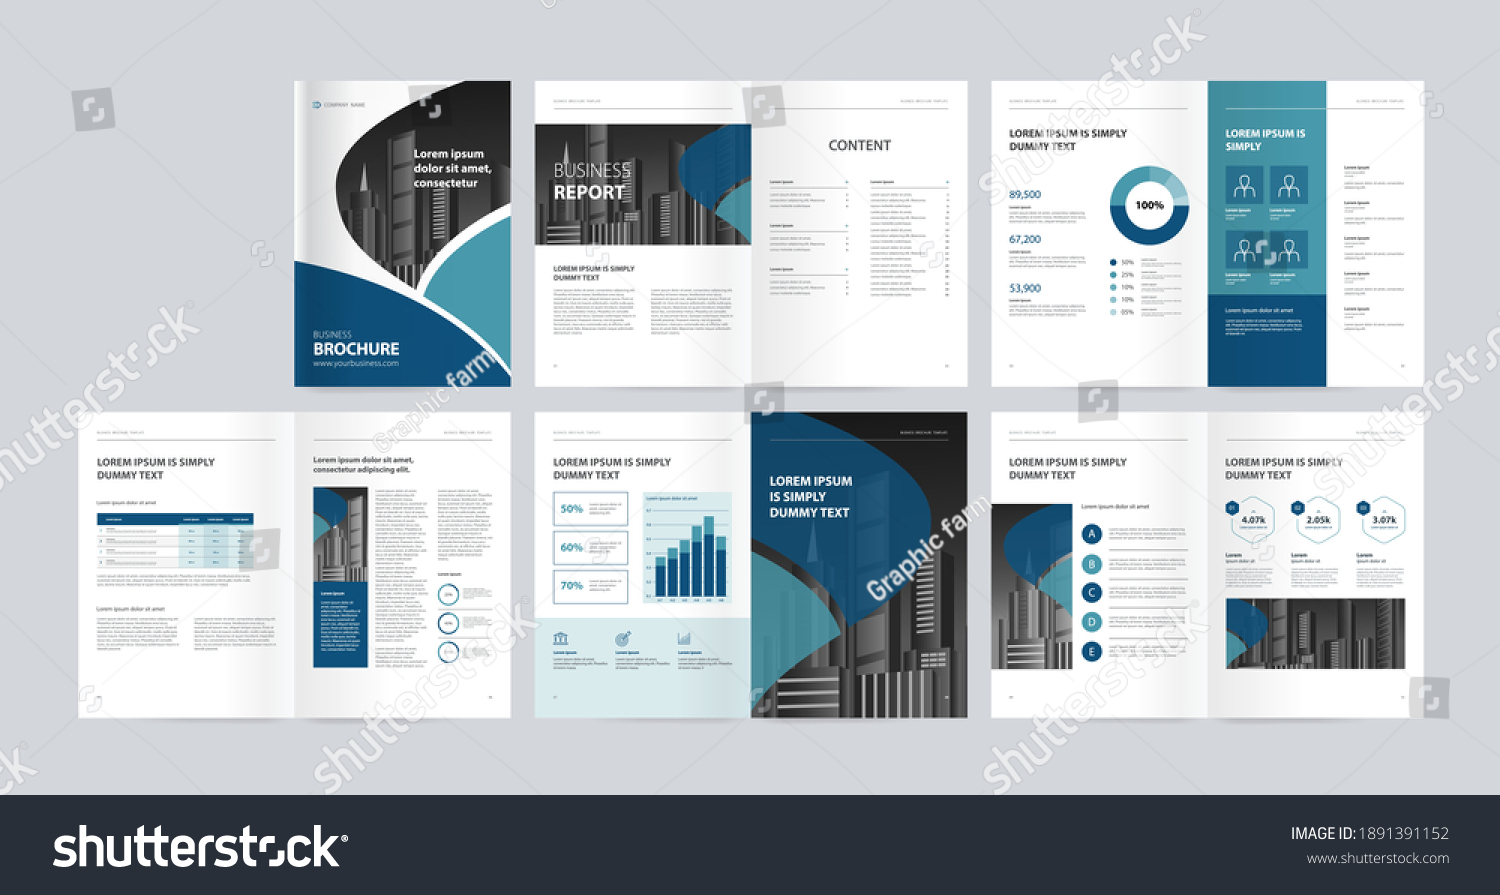 template layout design with cover page for company profile, annual report, brochures, flyers, presentations, leaflet, magazine, book .and a4 size scale for editable. #1891391152